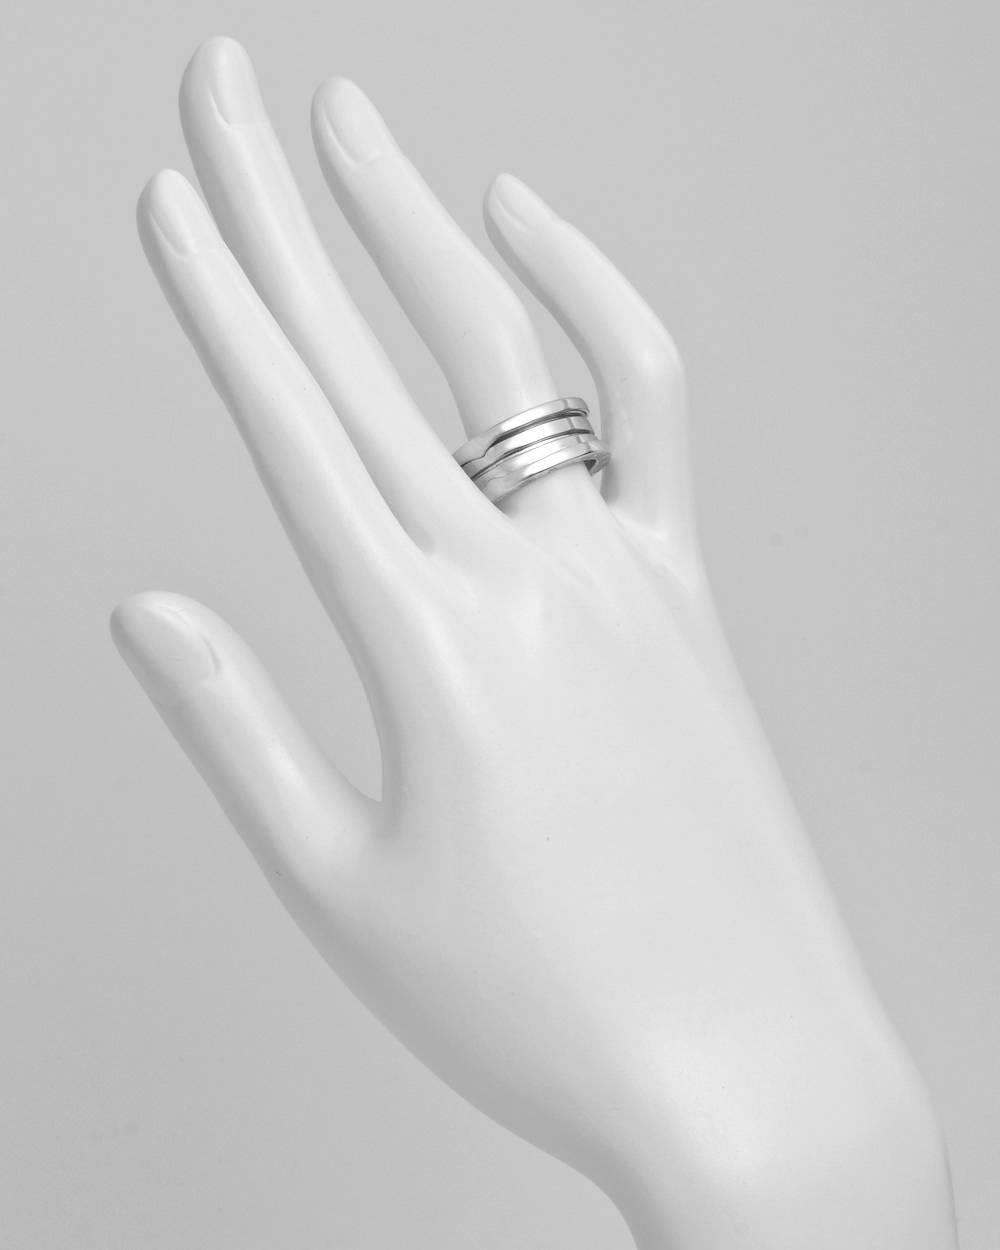 "B.Zero1" 3-band ring in polished 18k white gold. Handmade in Italy. Designed by Bulgari. Size 6.25 (52 - European).
